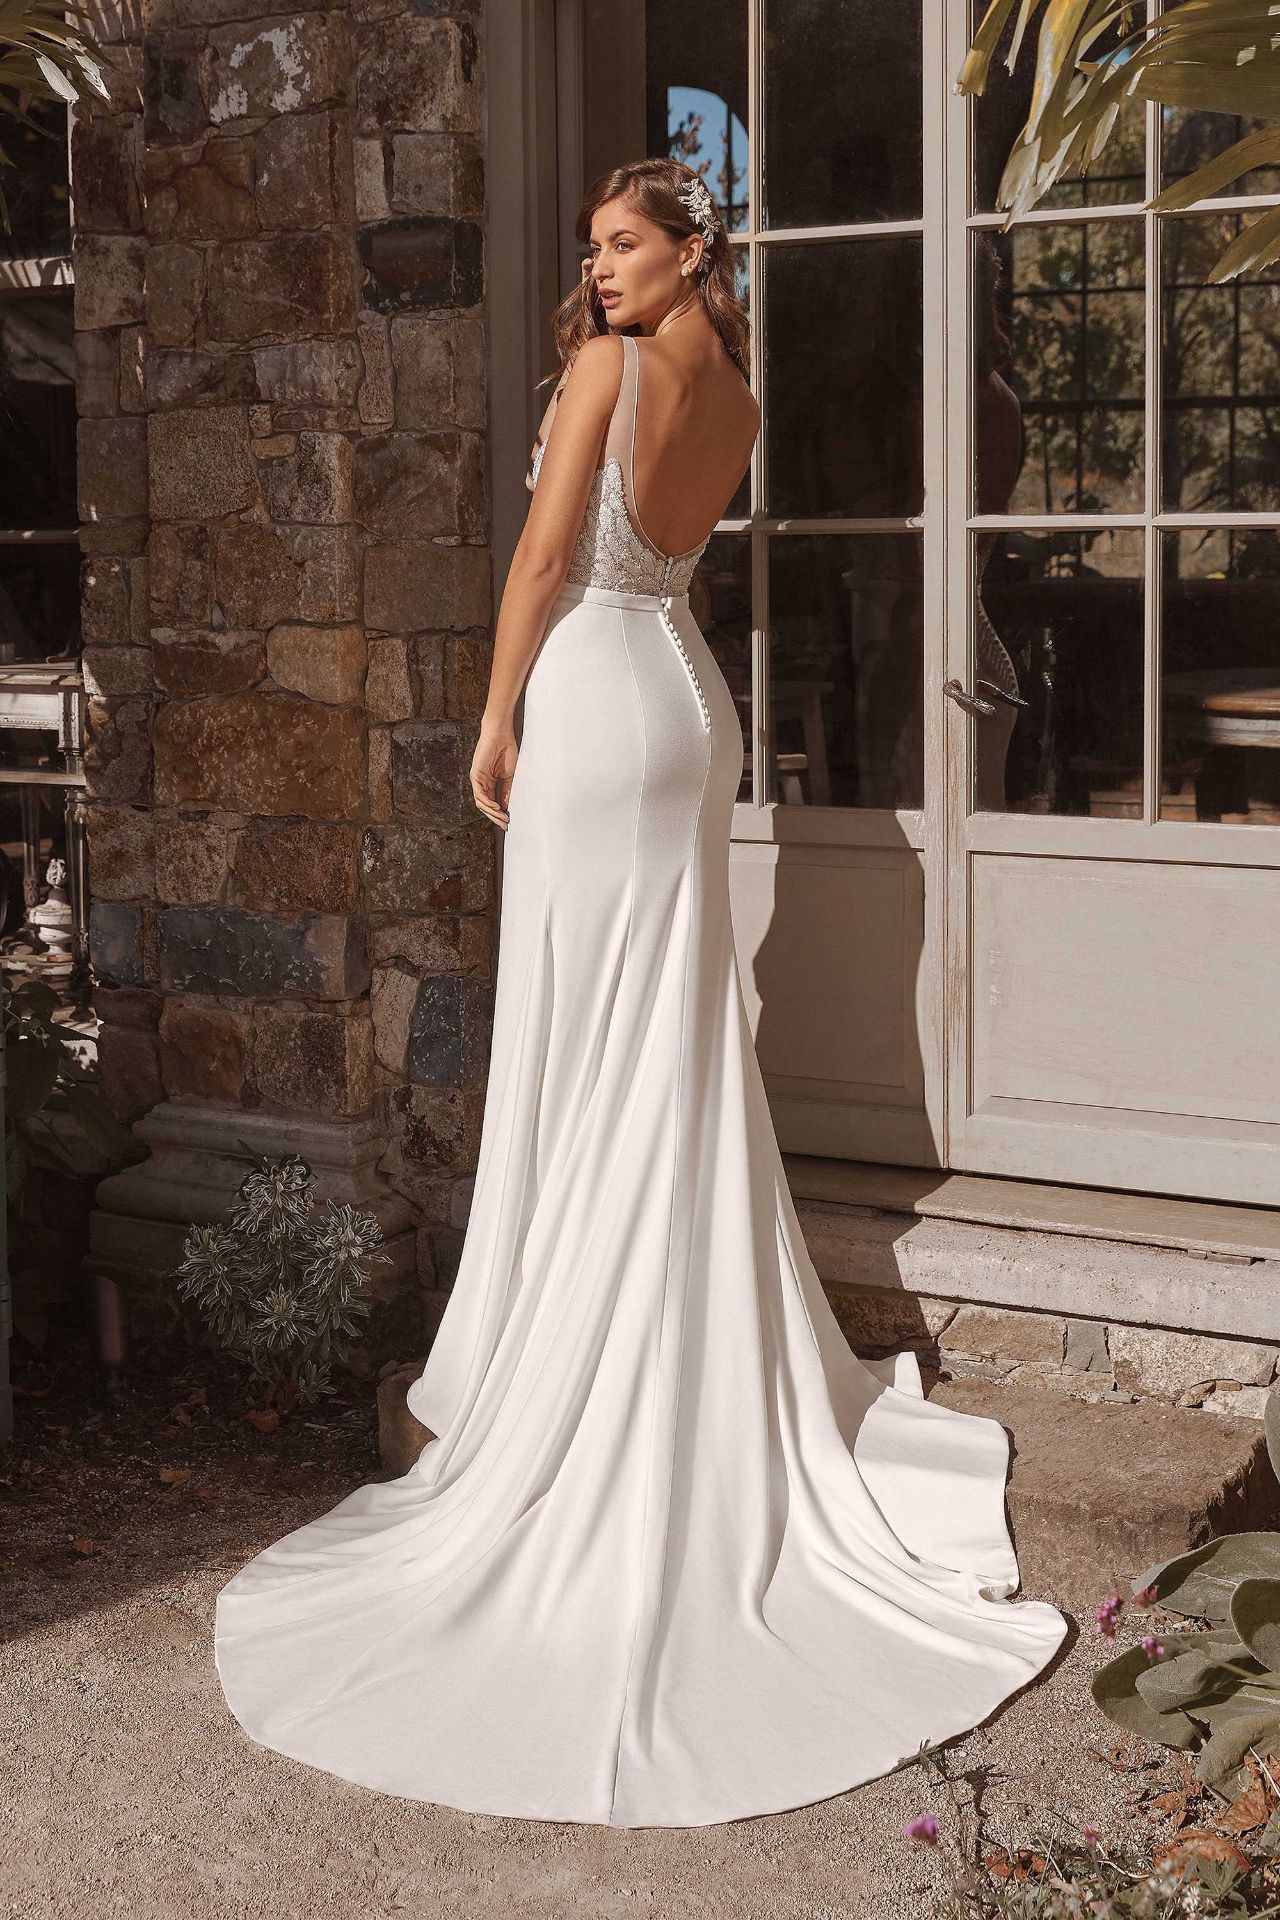 1 x Justin Alexander Crepe Fit & Flare Wedding Dress With V-Neck Bodice - Size 10 - RRP £1,725 - Image 2 of 7